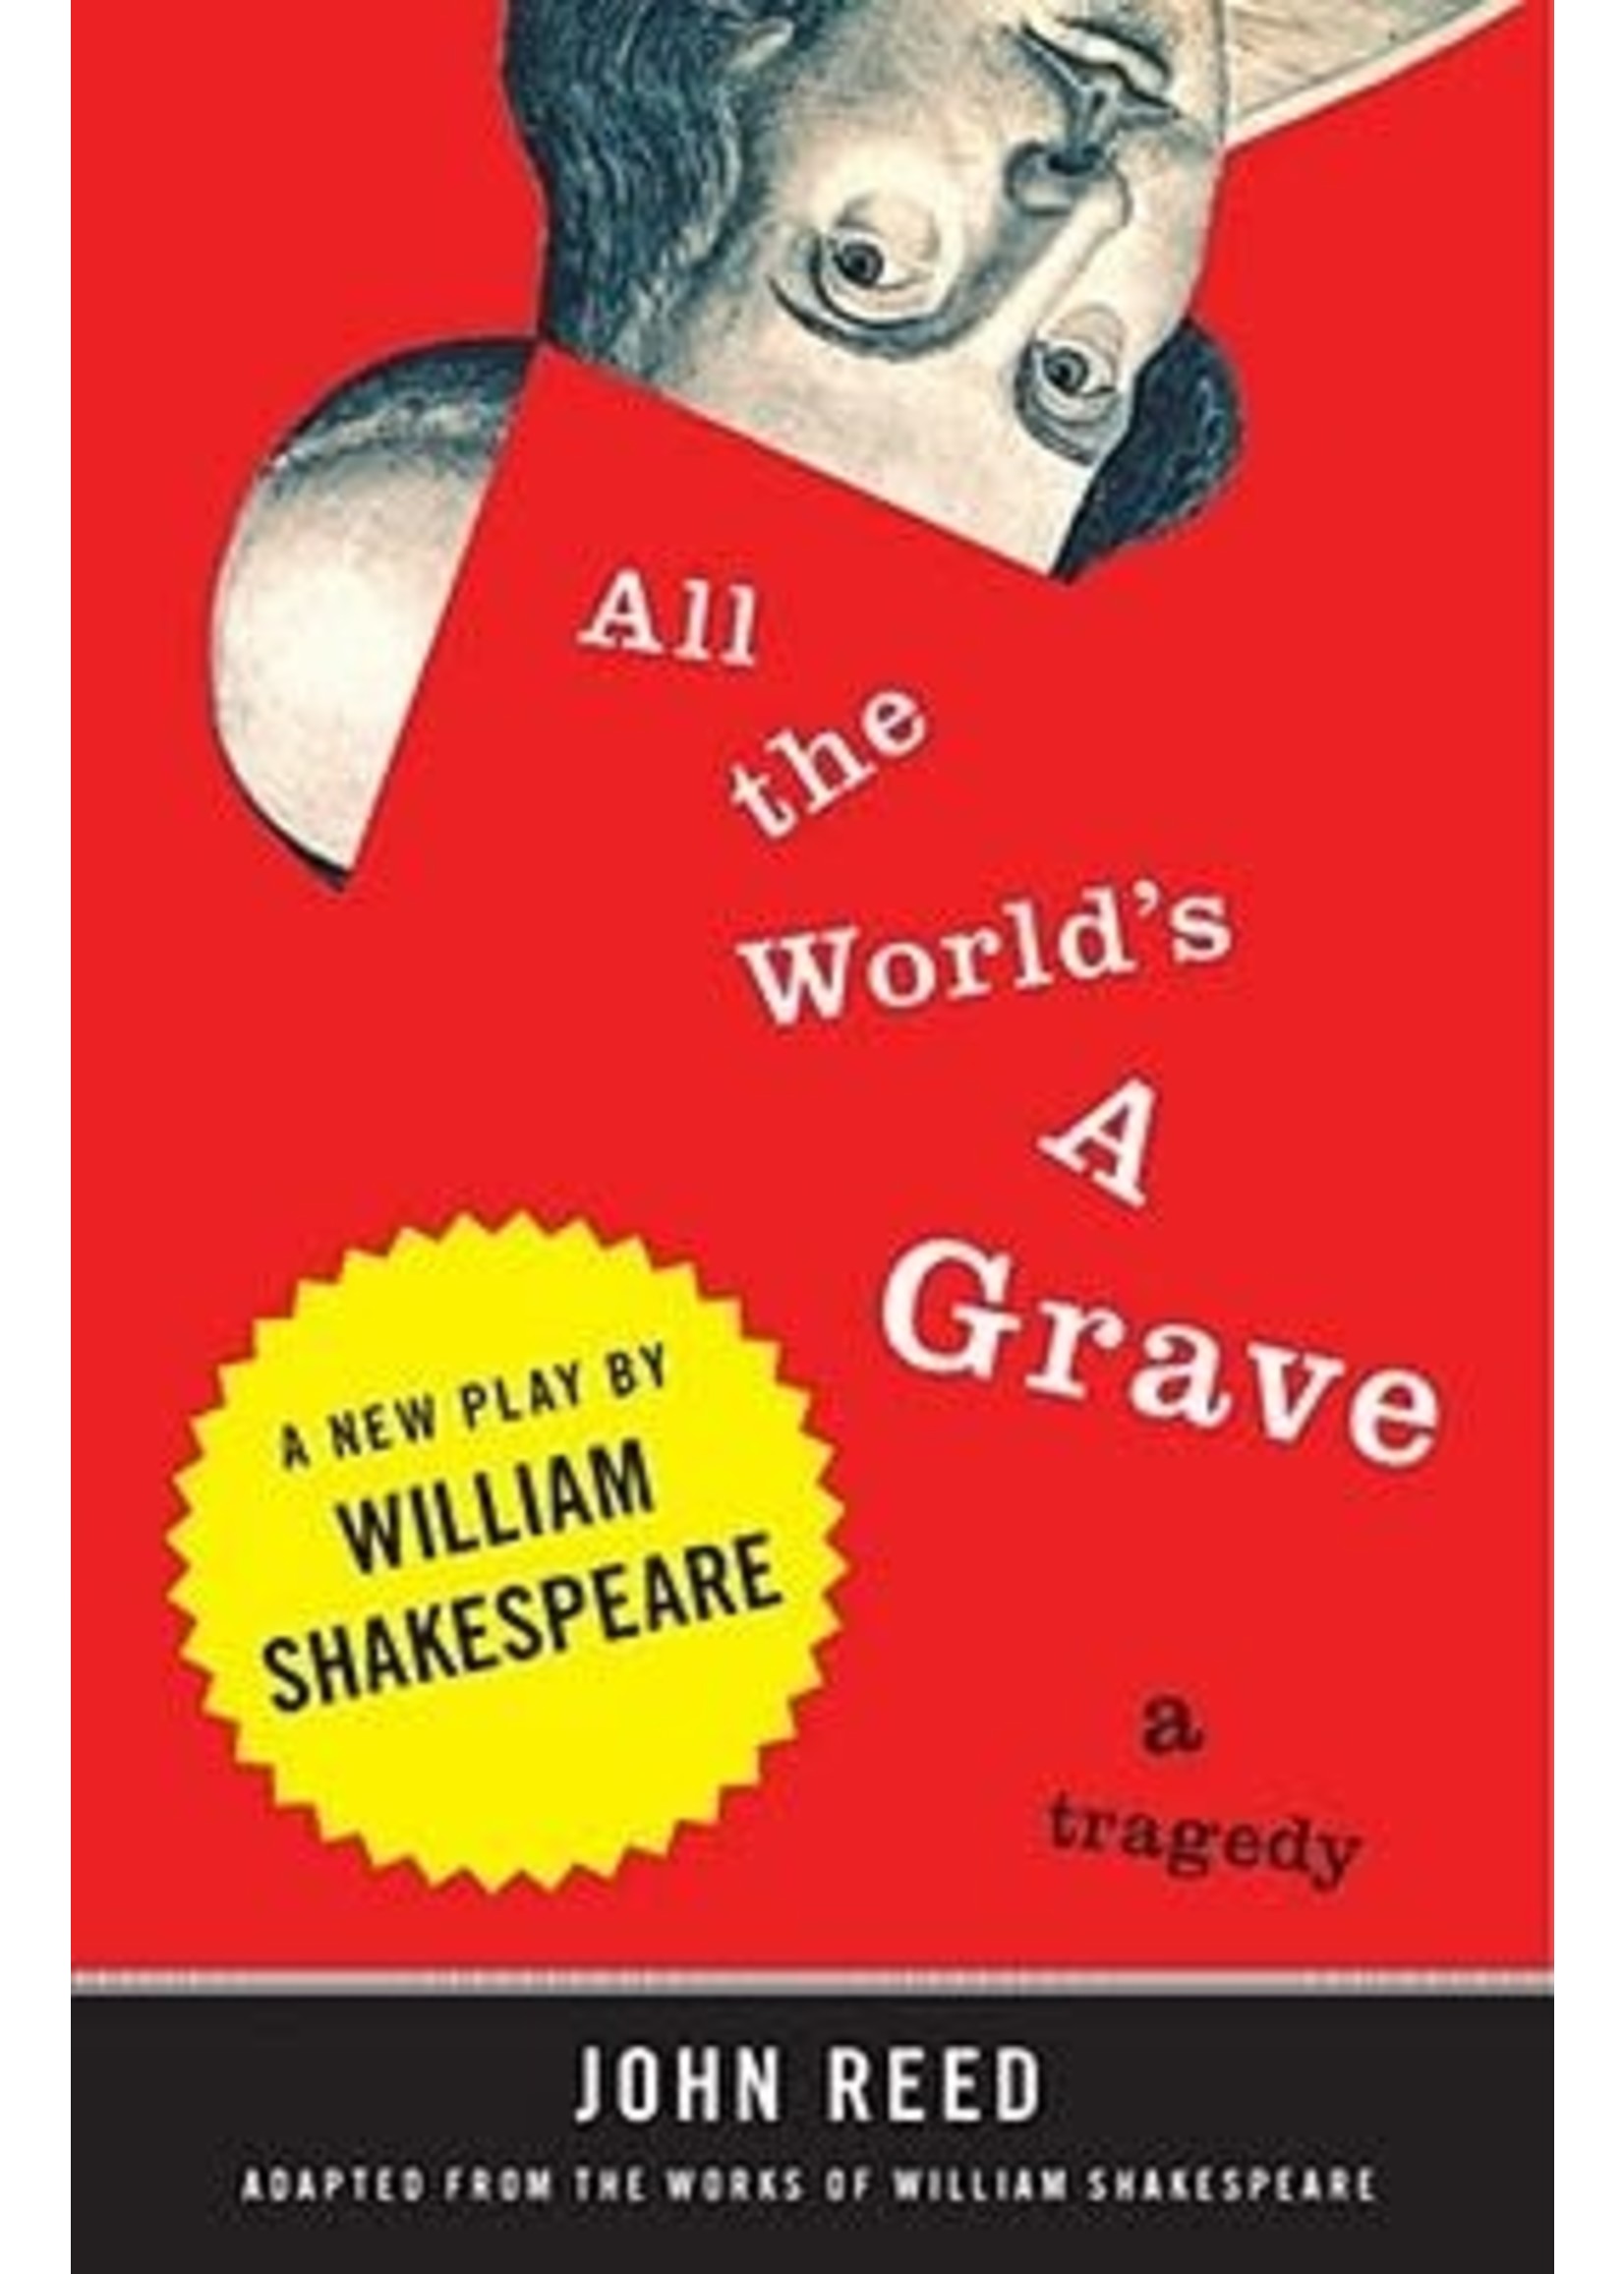 All the World's a Grave: A New Play by William Shakespeare by John Reed, William Shakespeare